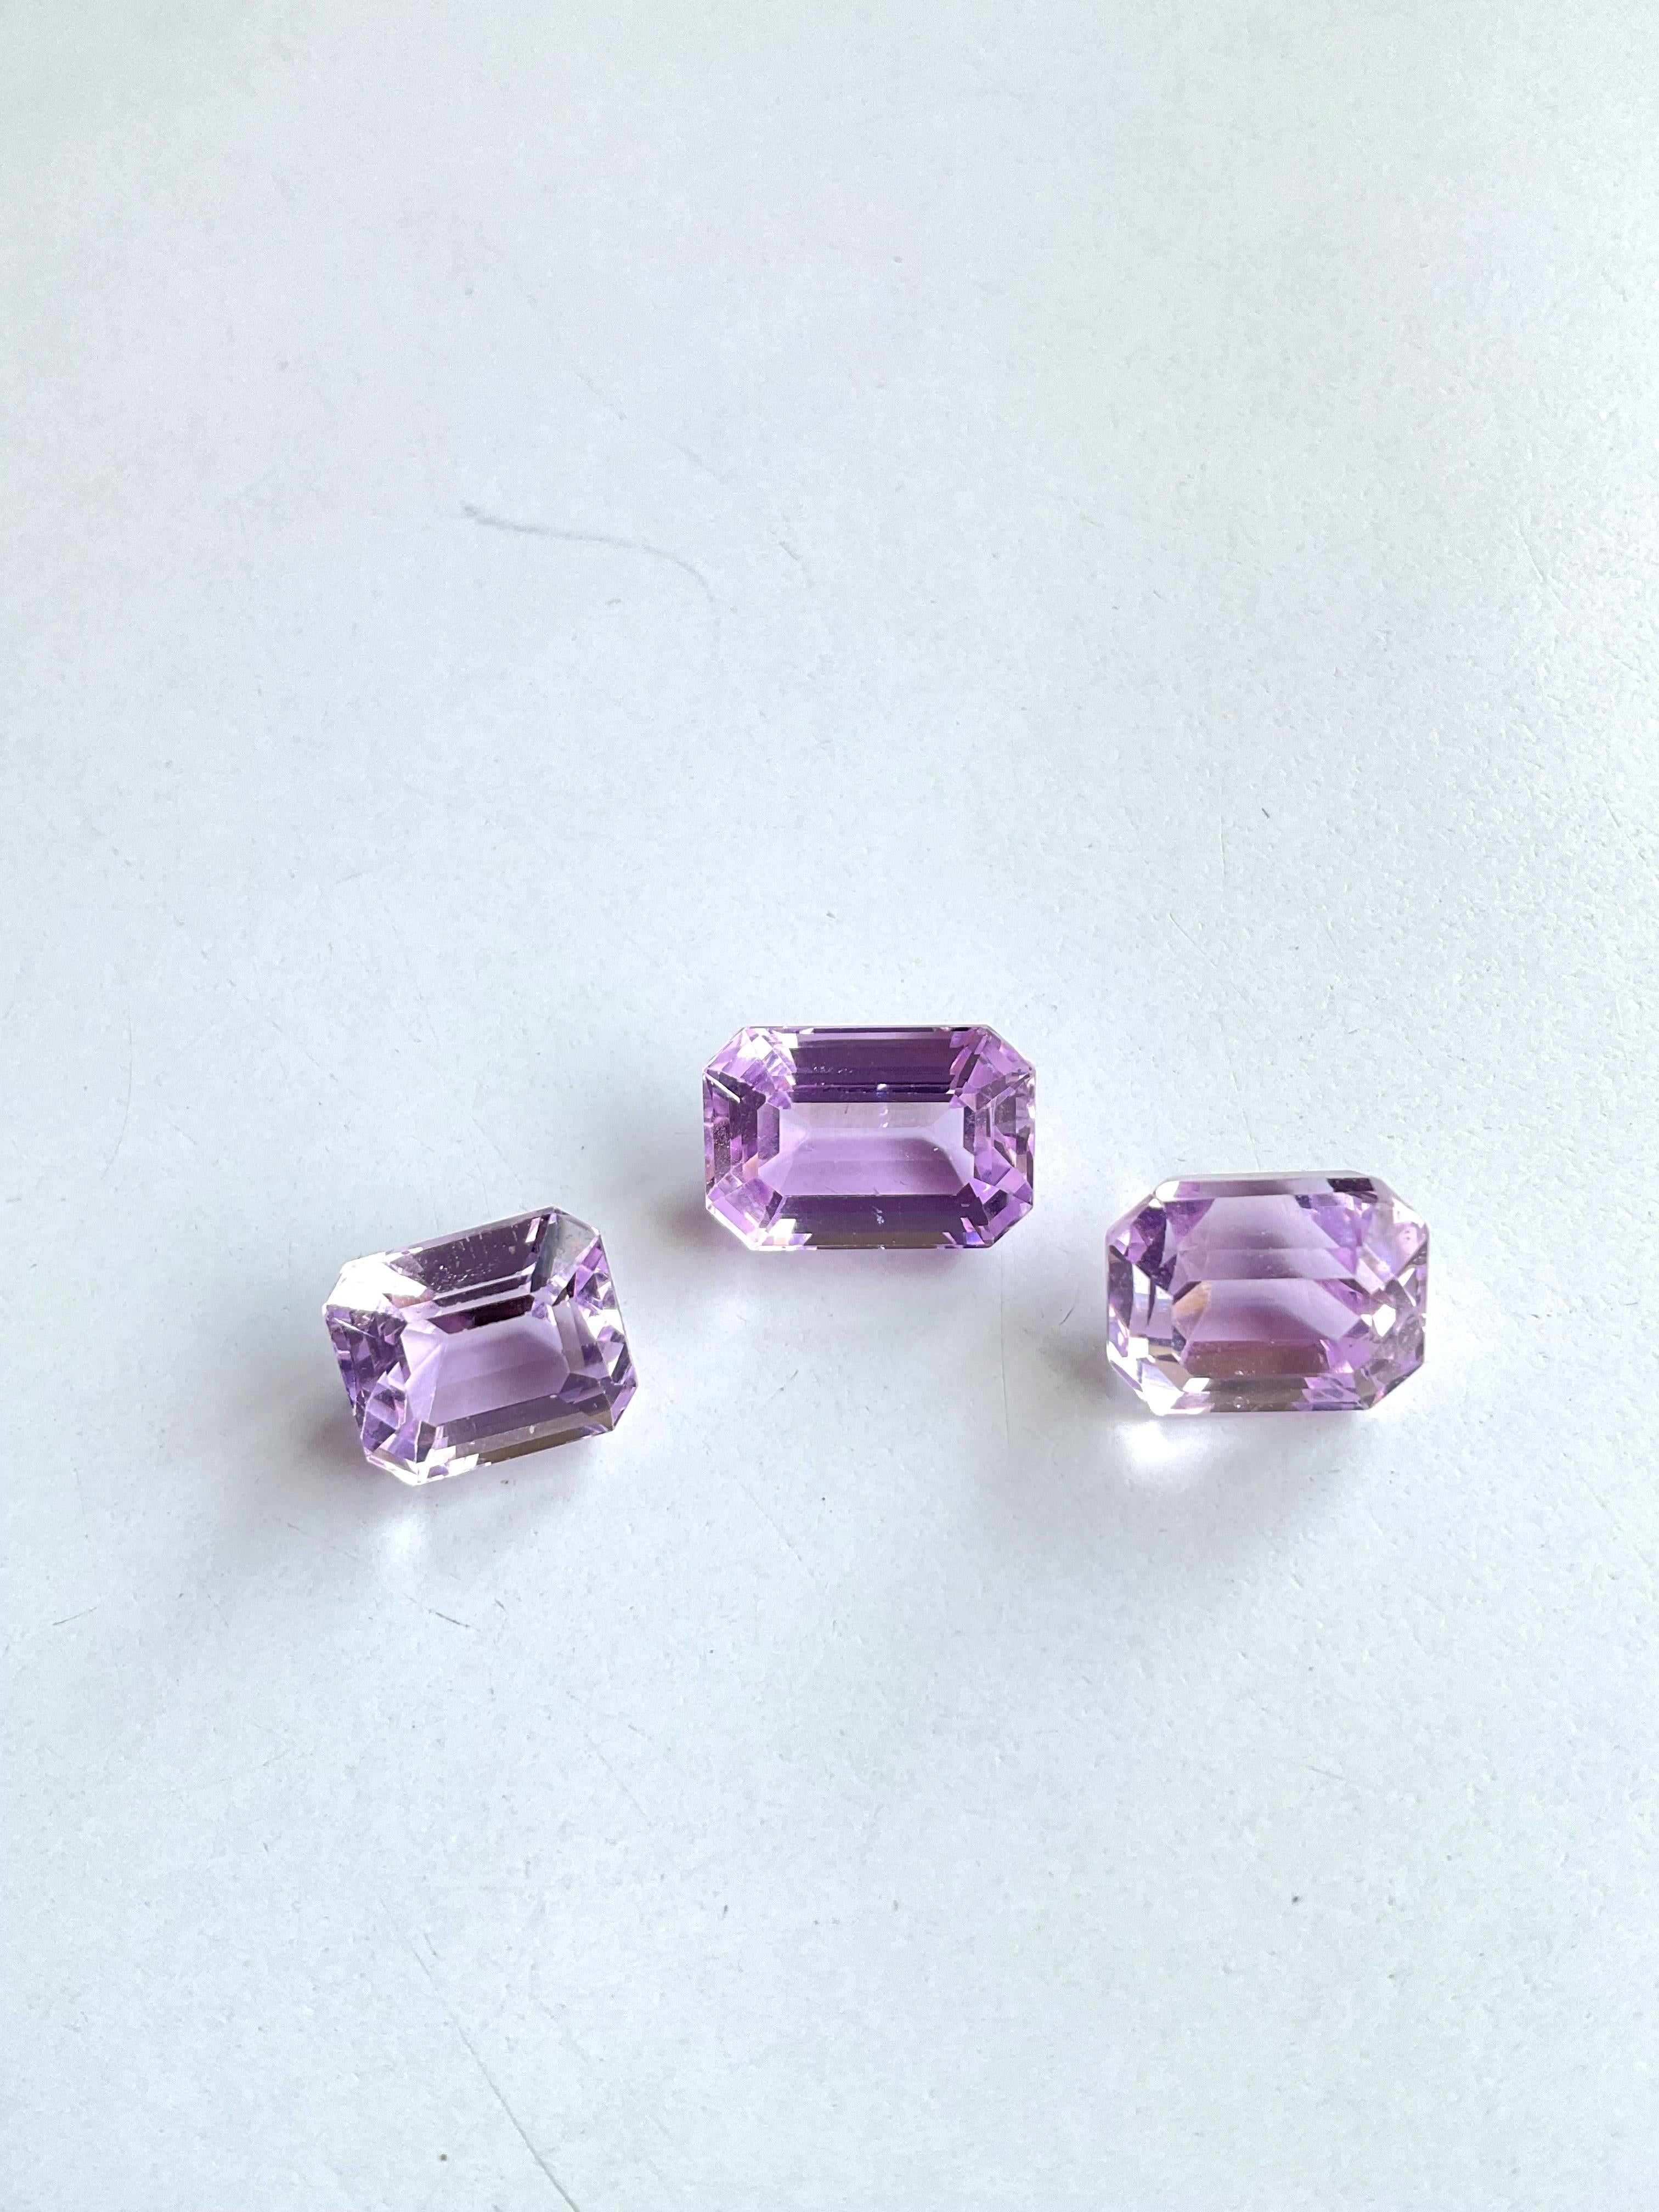 22.56 Carats Pink Kunzite Octagon Natural Cut Stones For Fine Gem Jewellery For Sale 3